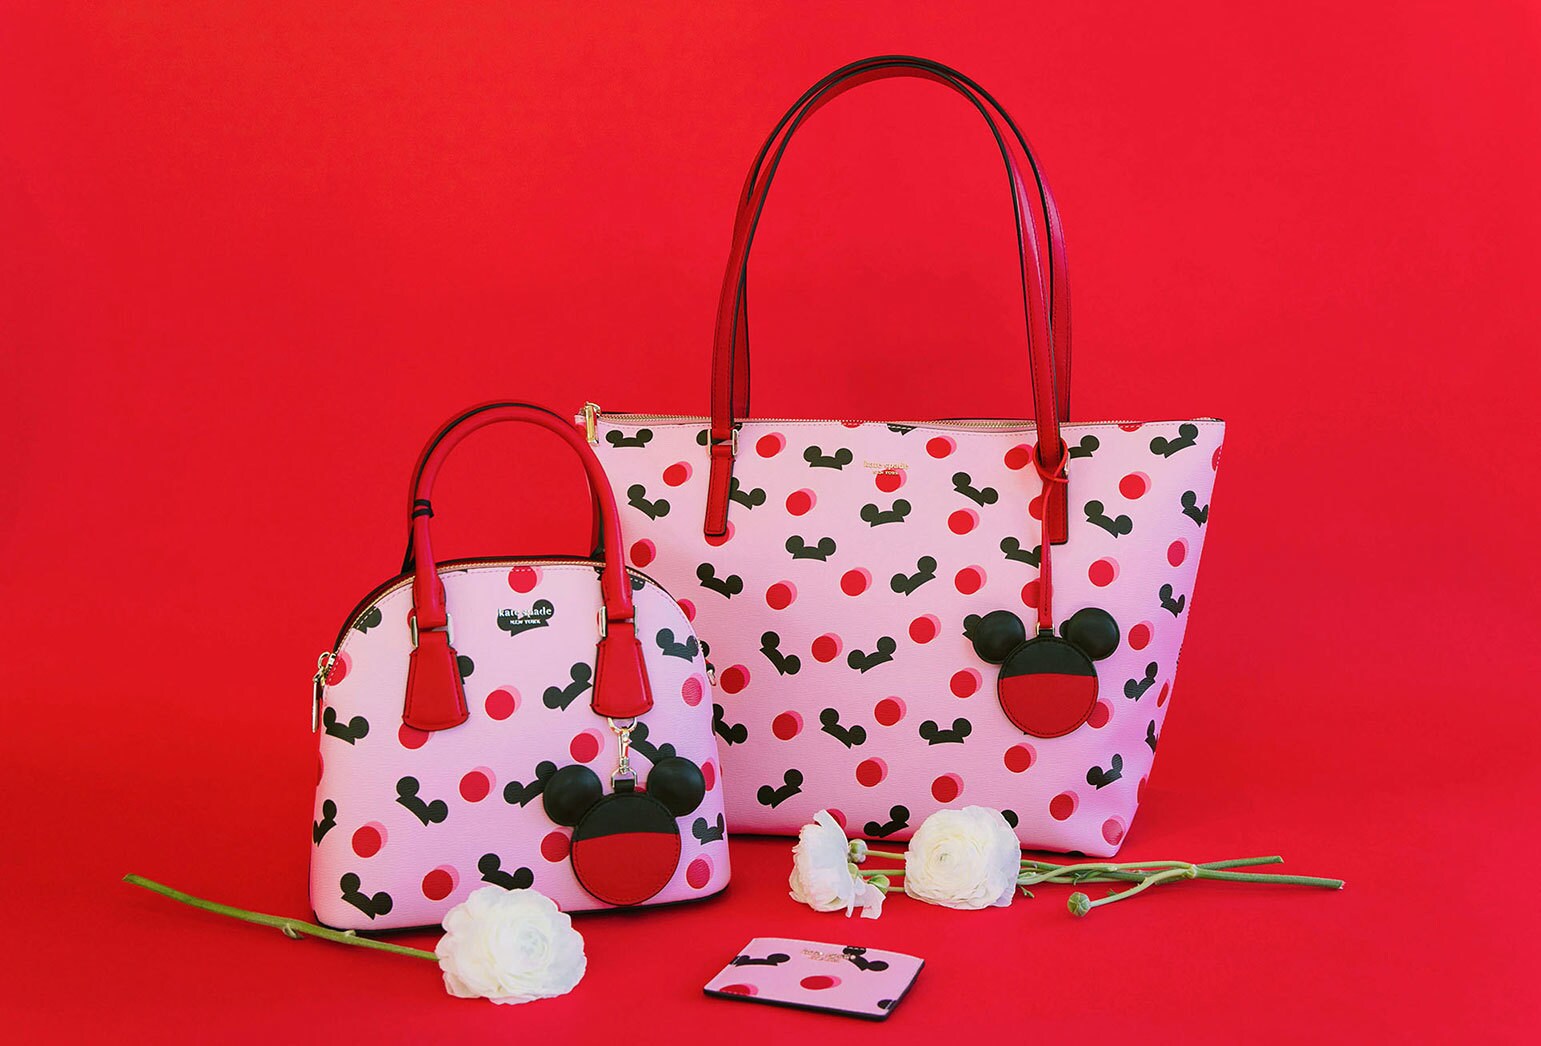 Hand bags from Kate Spade's Mickey Mouse Collection